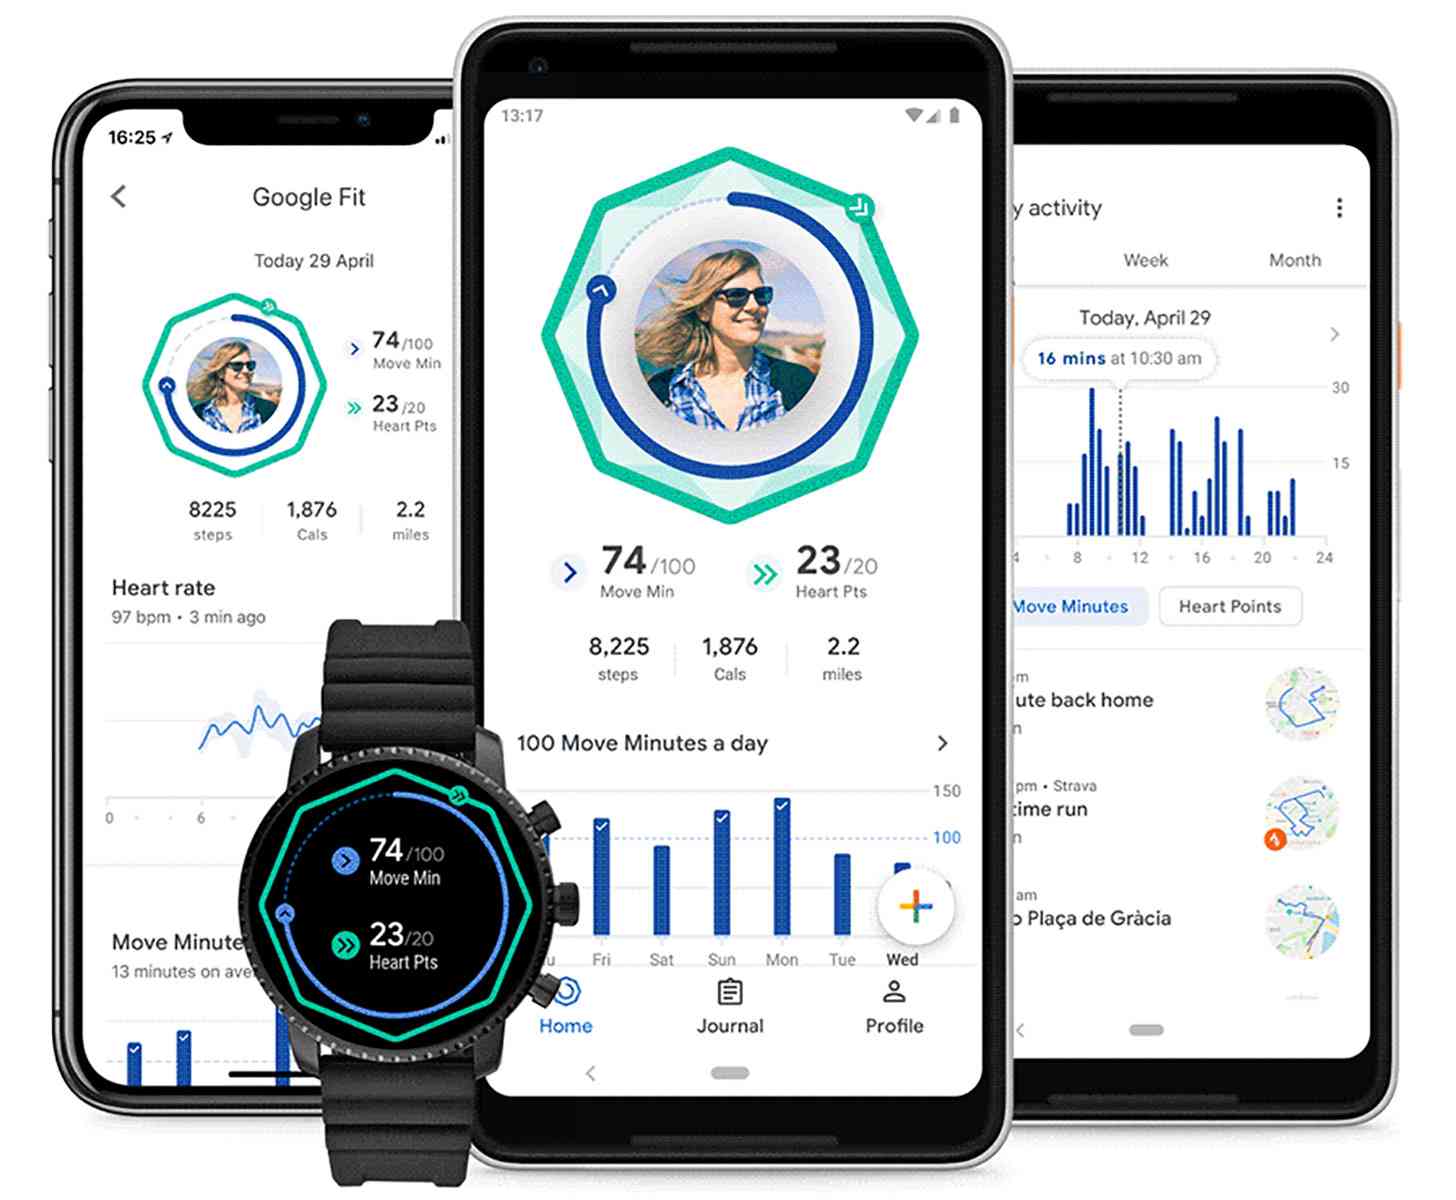 Google Fit redesign official